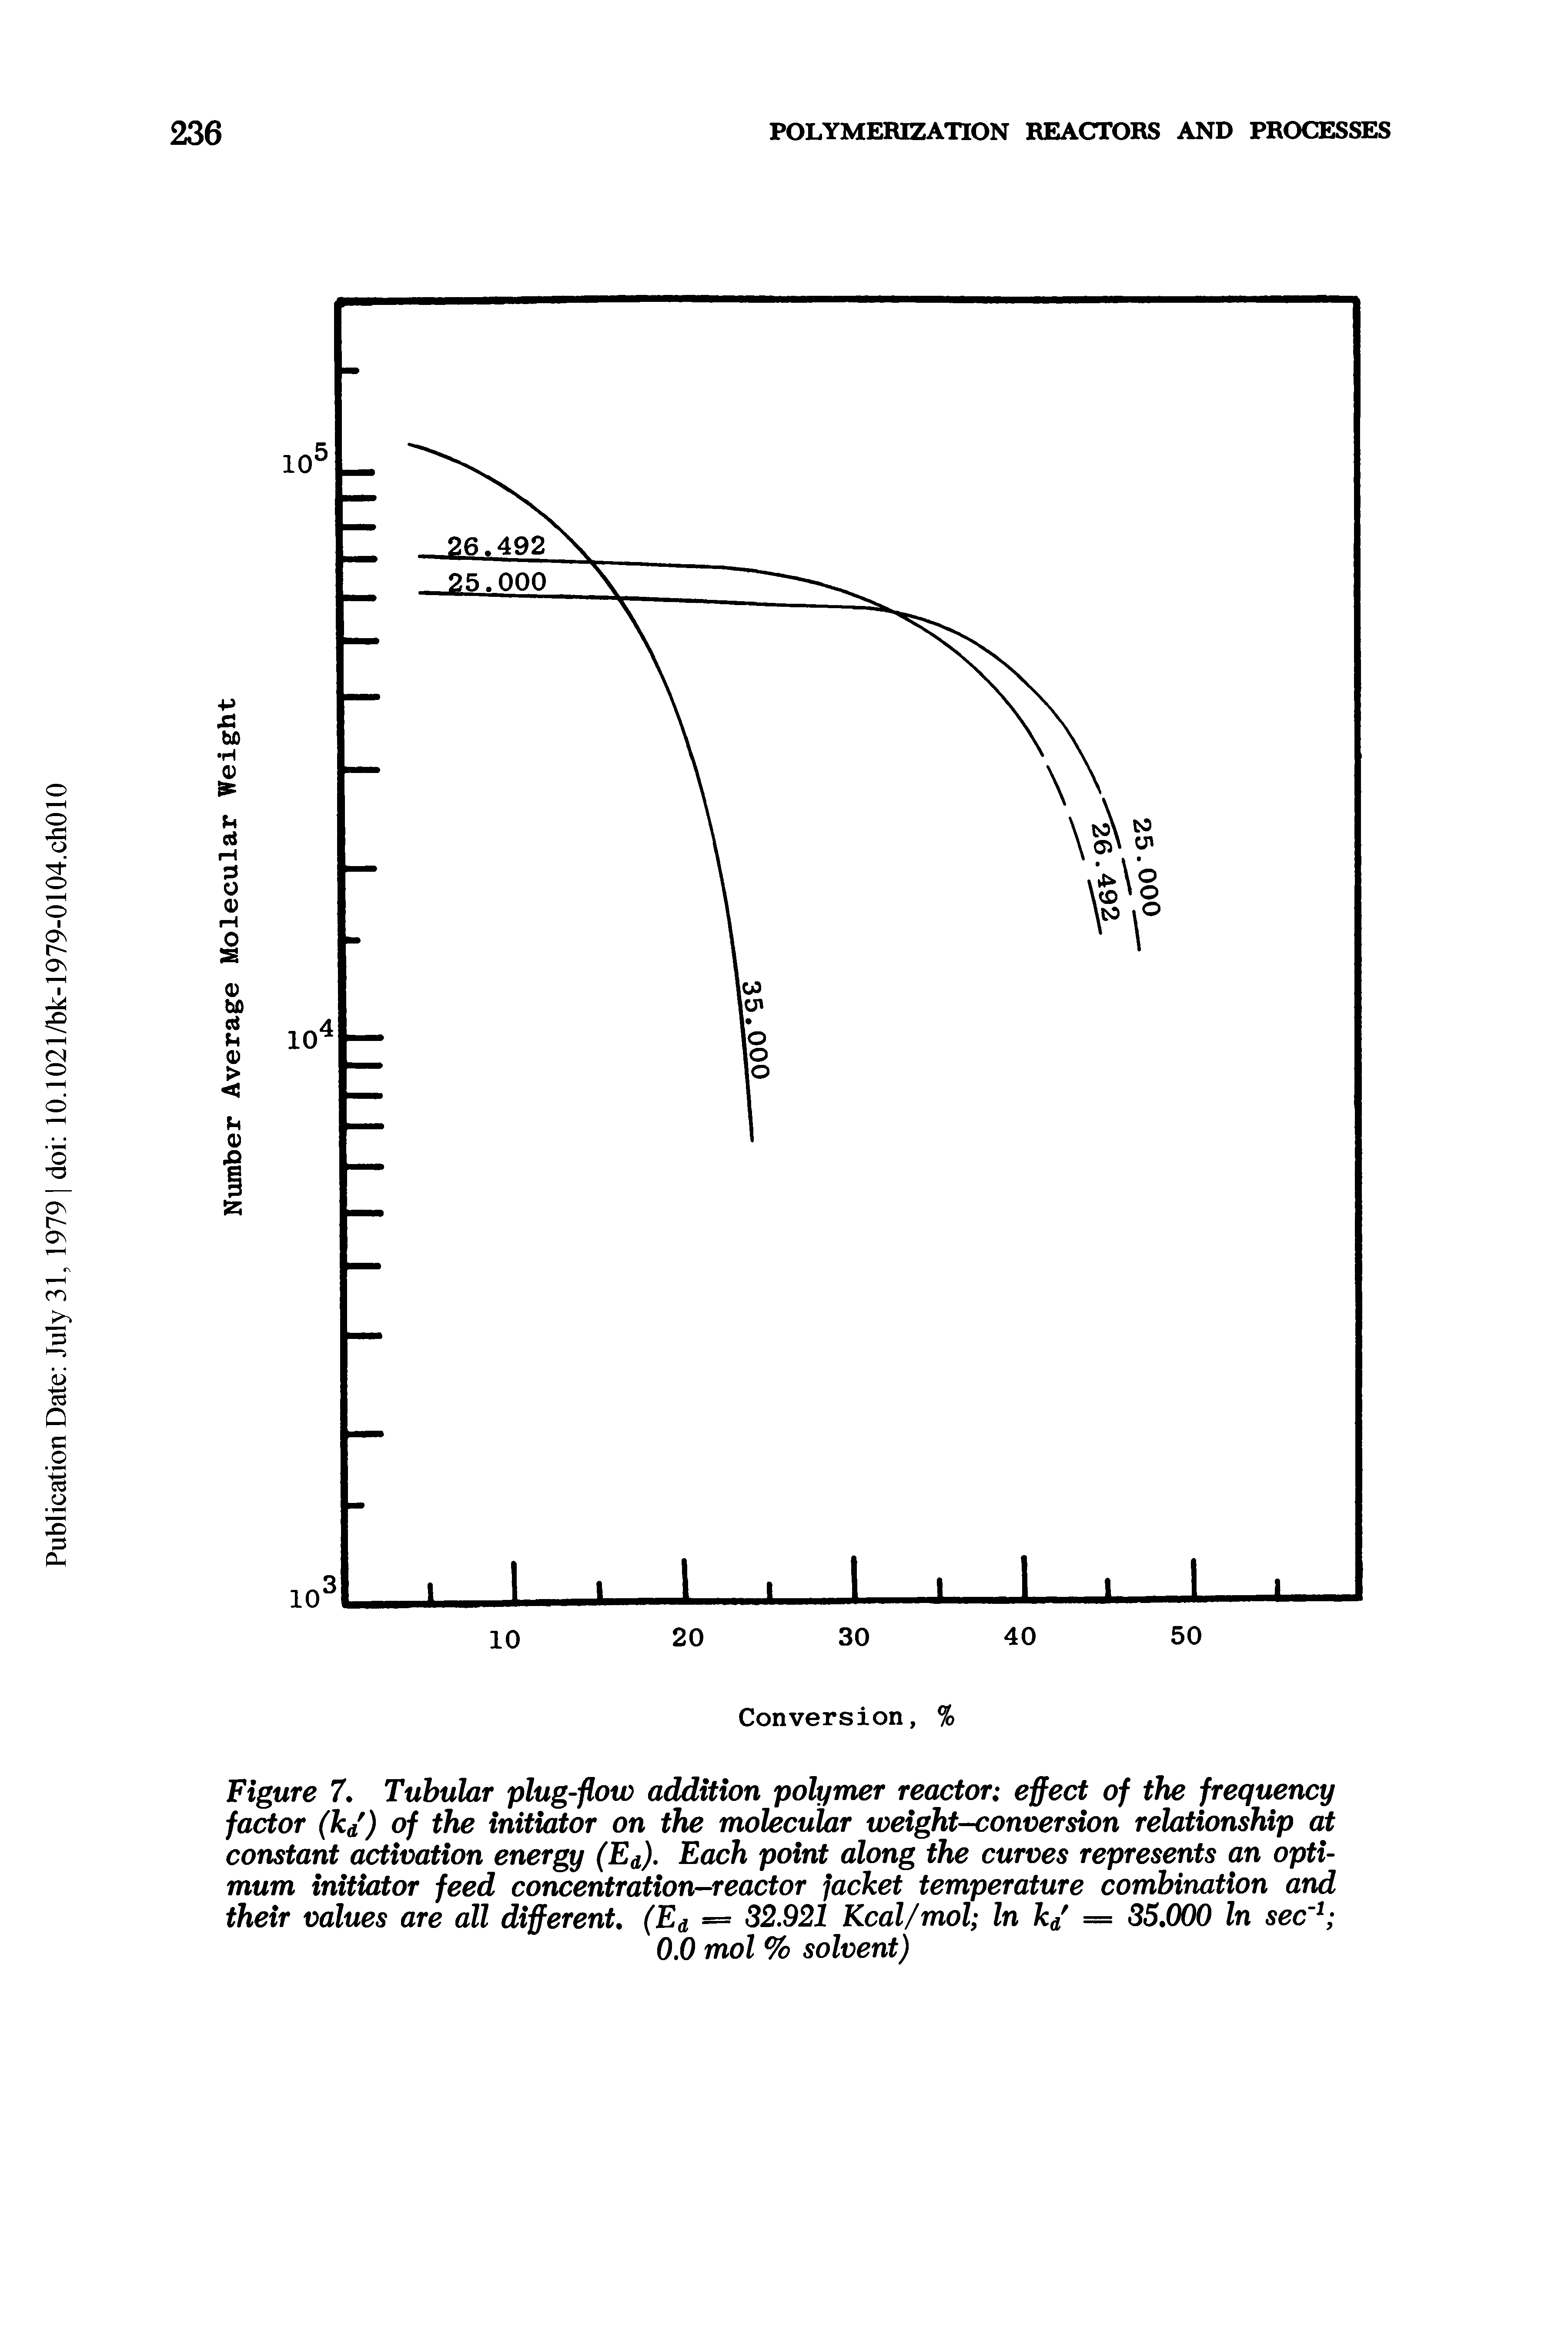 Figure 7. Tubular plug-flow addition polymer reactor effect of the frequency factor (ka) of the initiator on the molecular weight-conversion relationship at constant activation energy (Ea). Each point along the curves represents an optimum initiator feed concentration-reactor jacket temperature combination and their values are all different, (Ea = 32.921 Kcal/mol In ka = 35,000 In sec ...